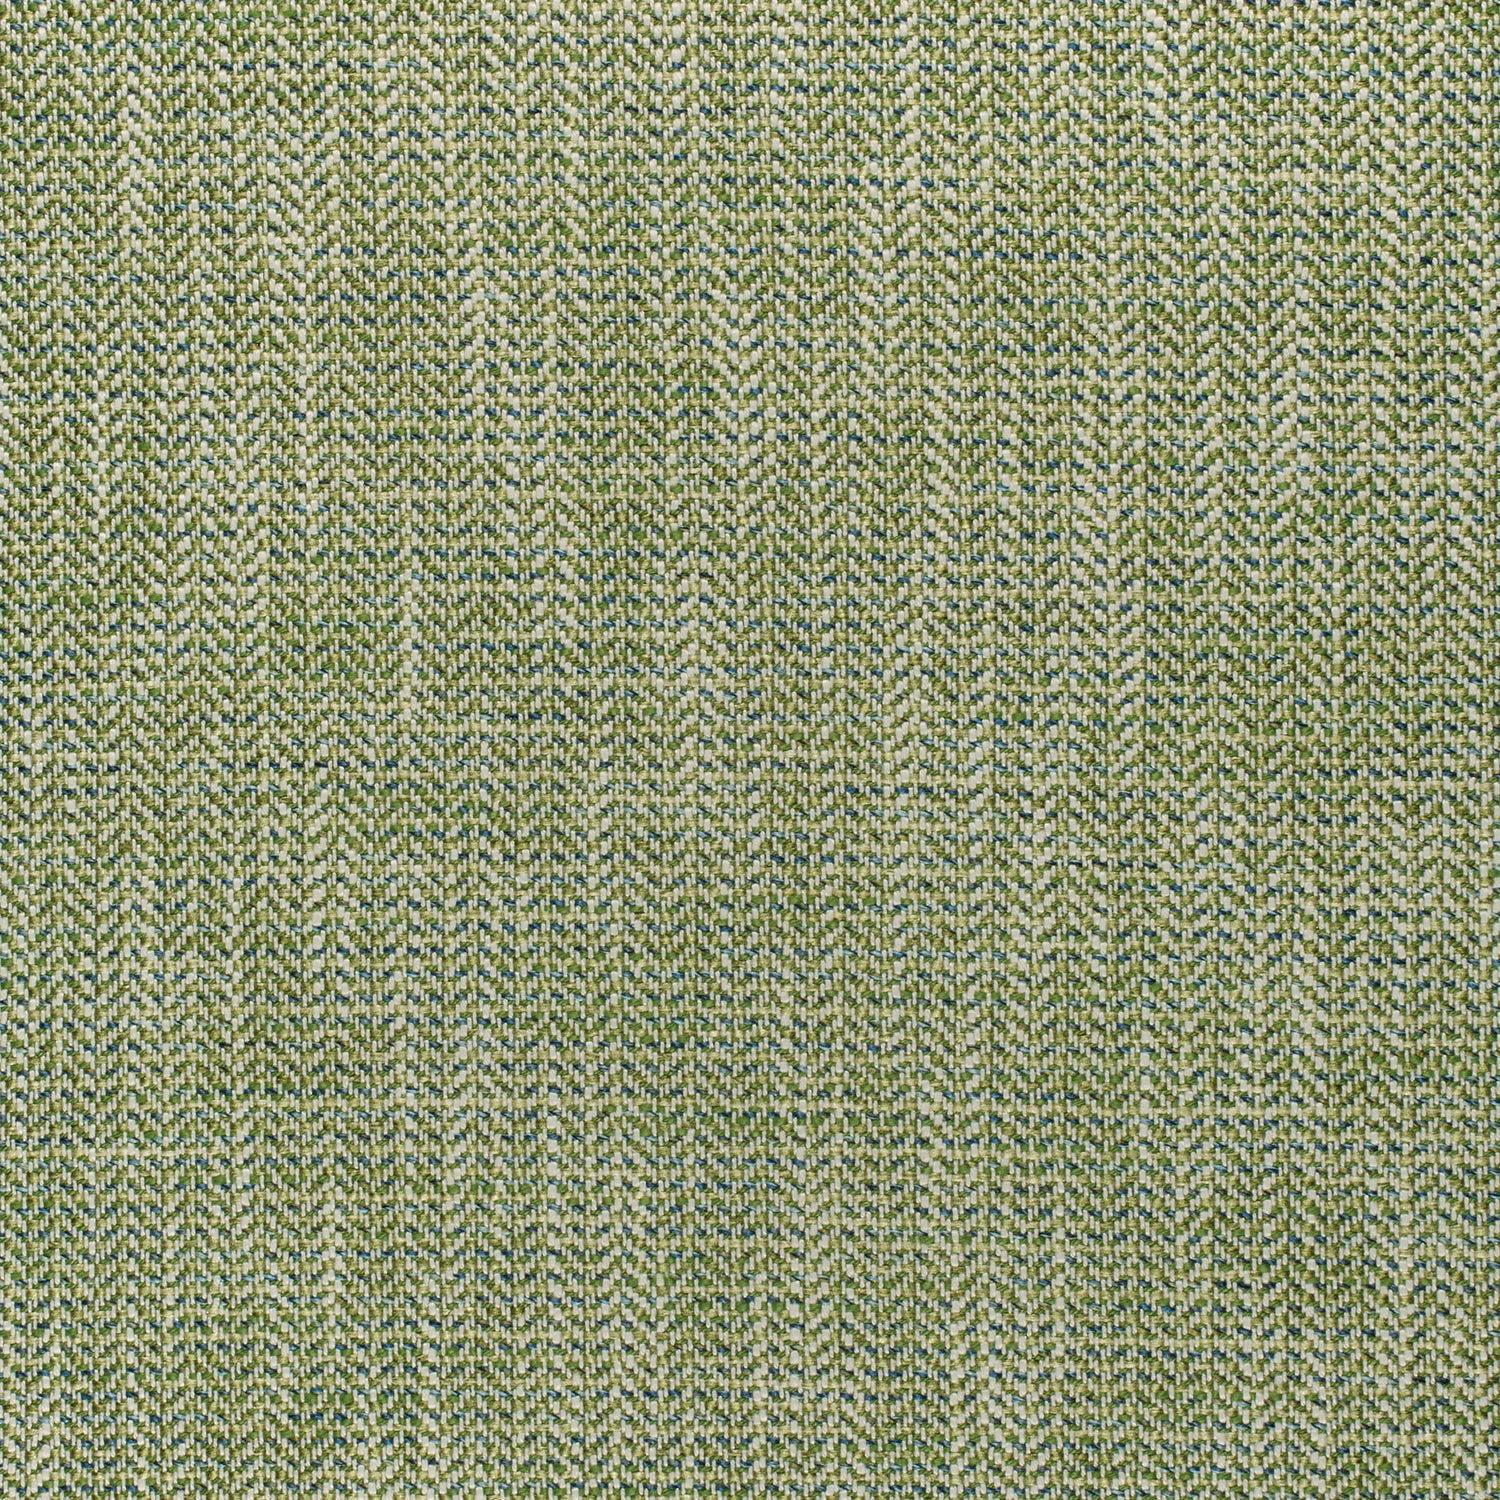 Ashbourne Tweed fabric in grass color - pattern number W80612 - by Thibaut in the Pinnacle collection